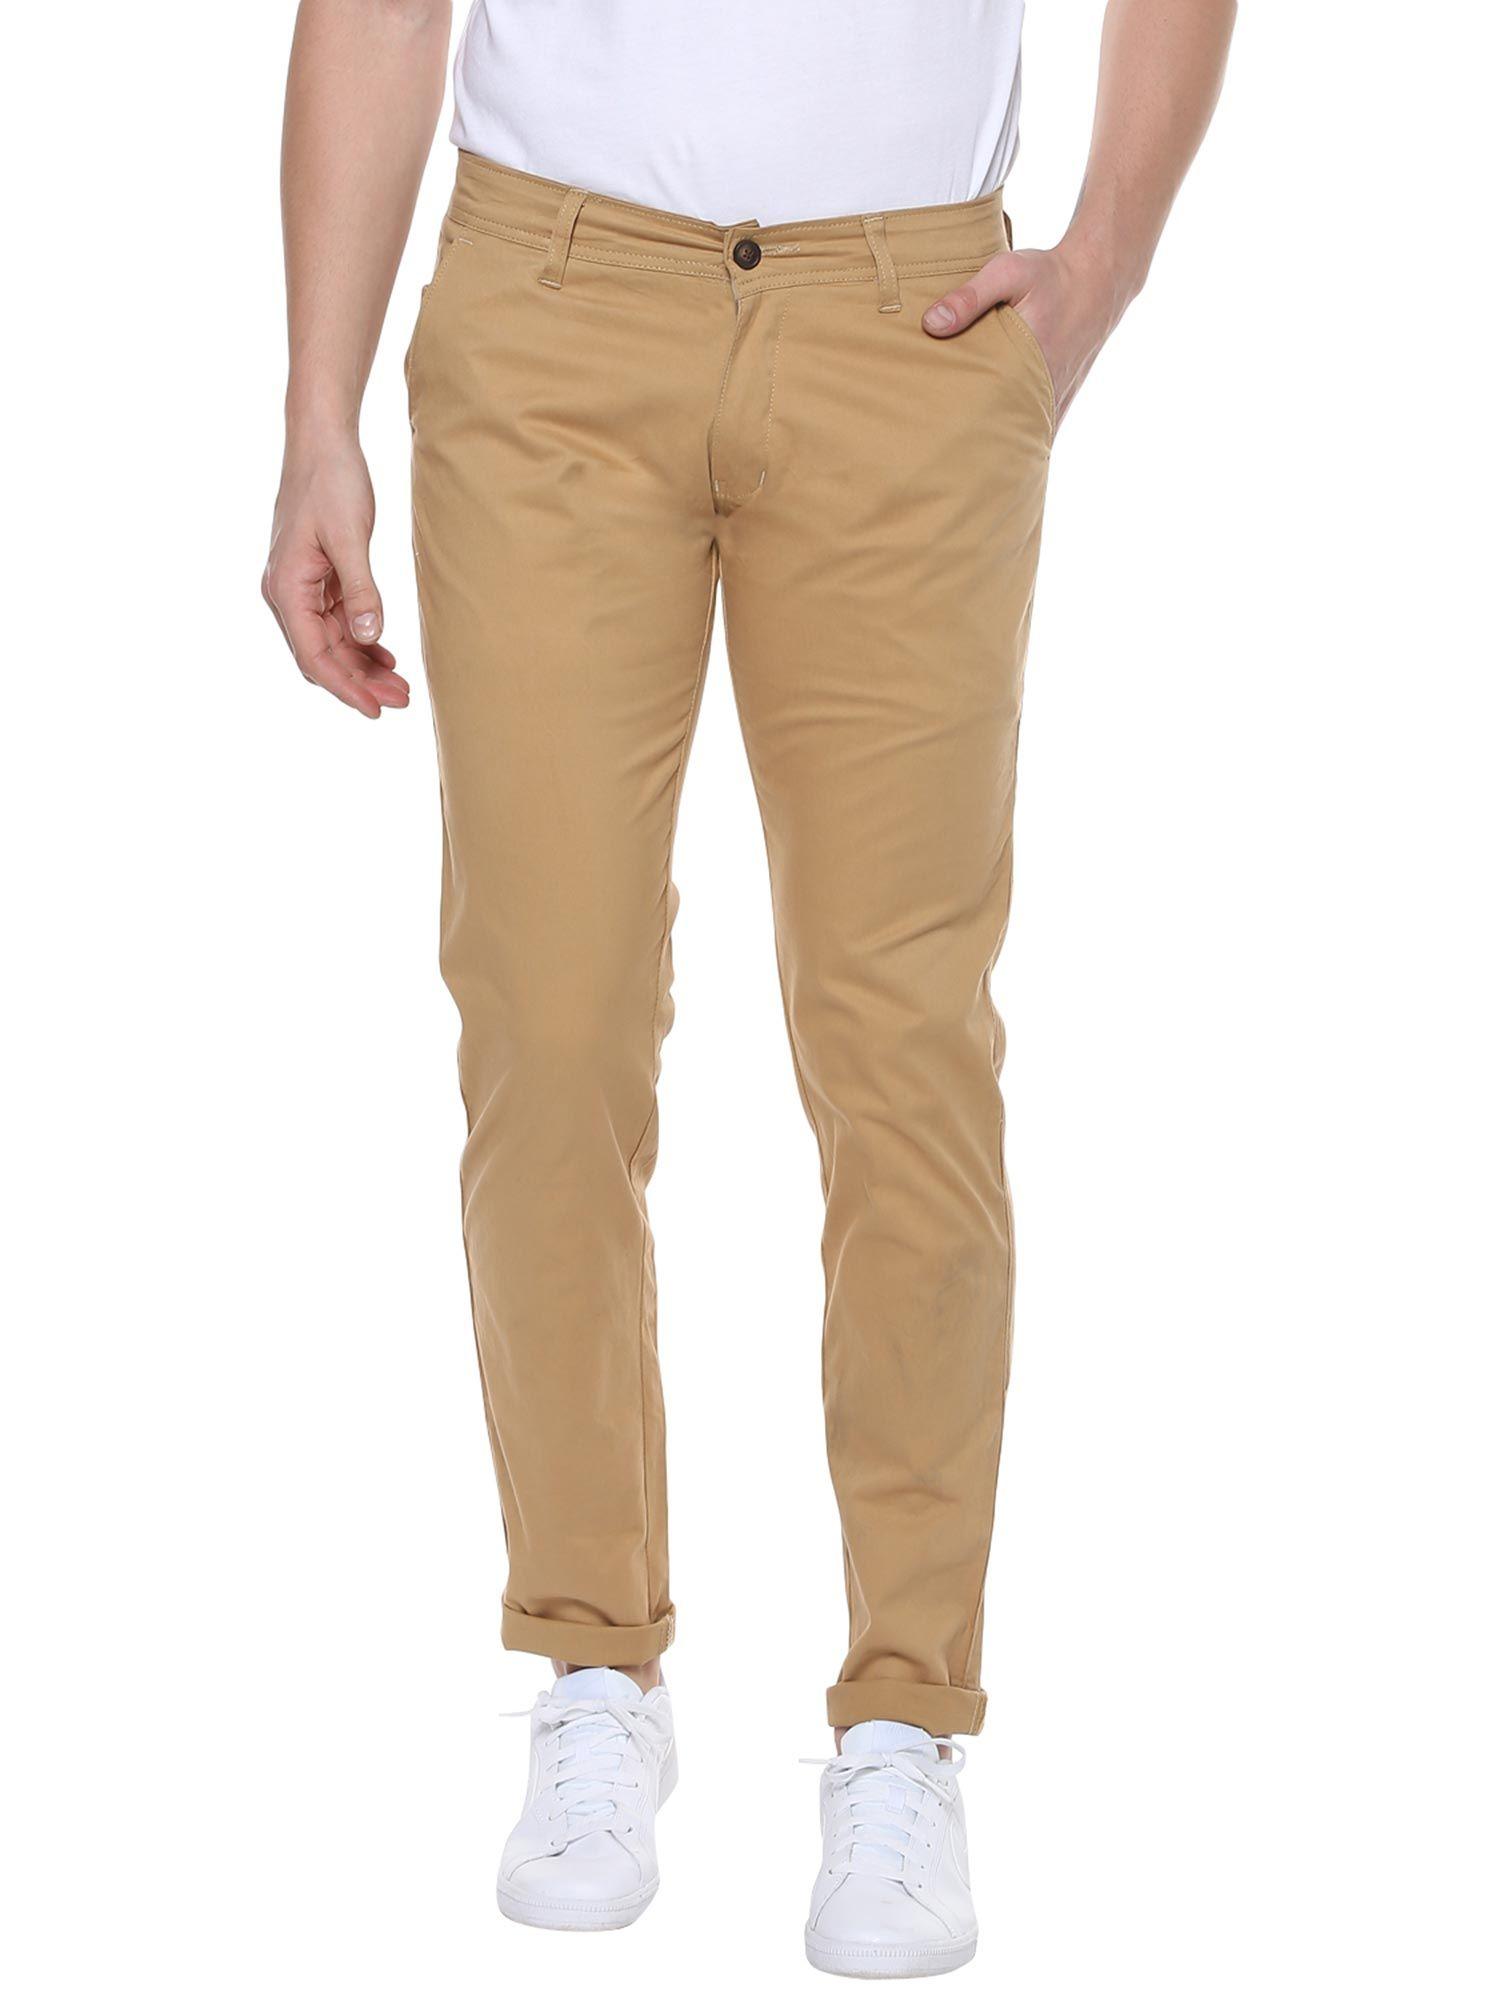 men-beige-cotton-slim-fit-casual-chinos-trousers-stretch